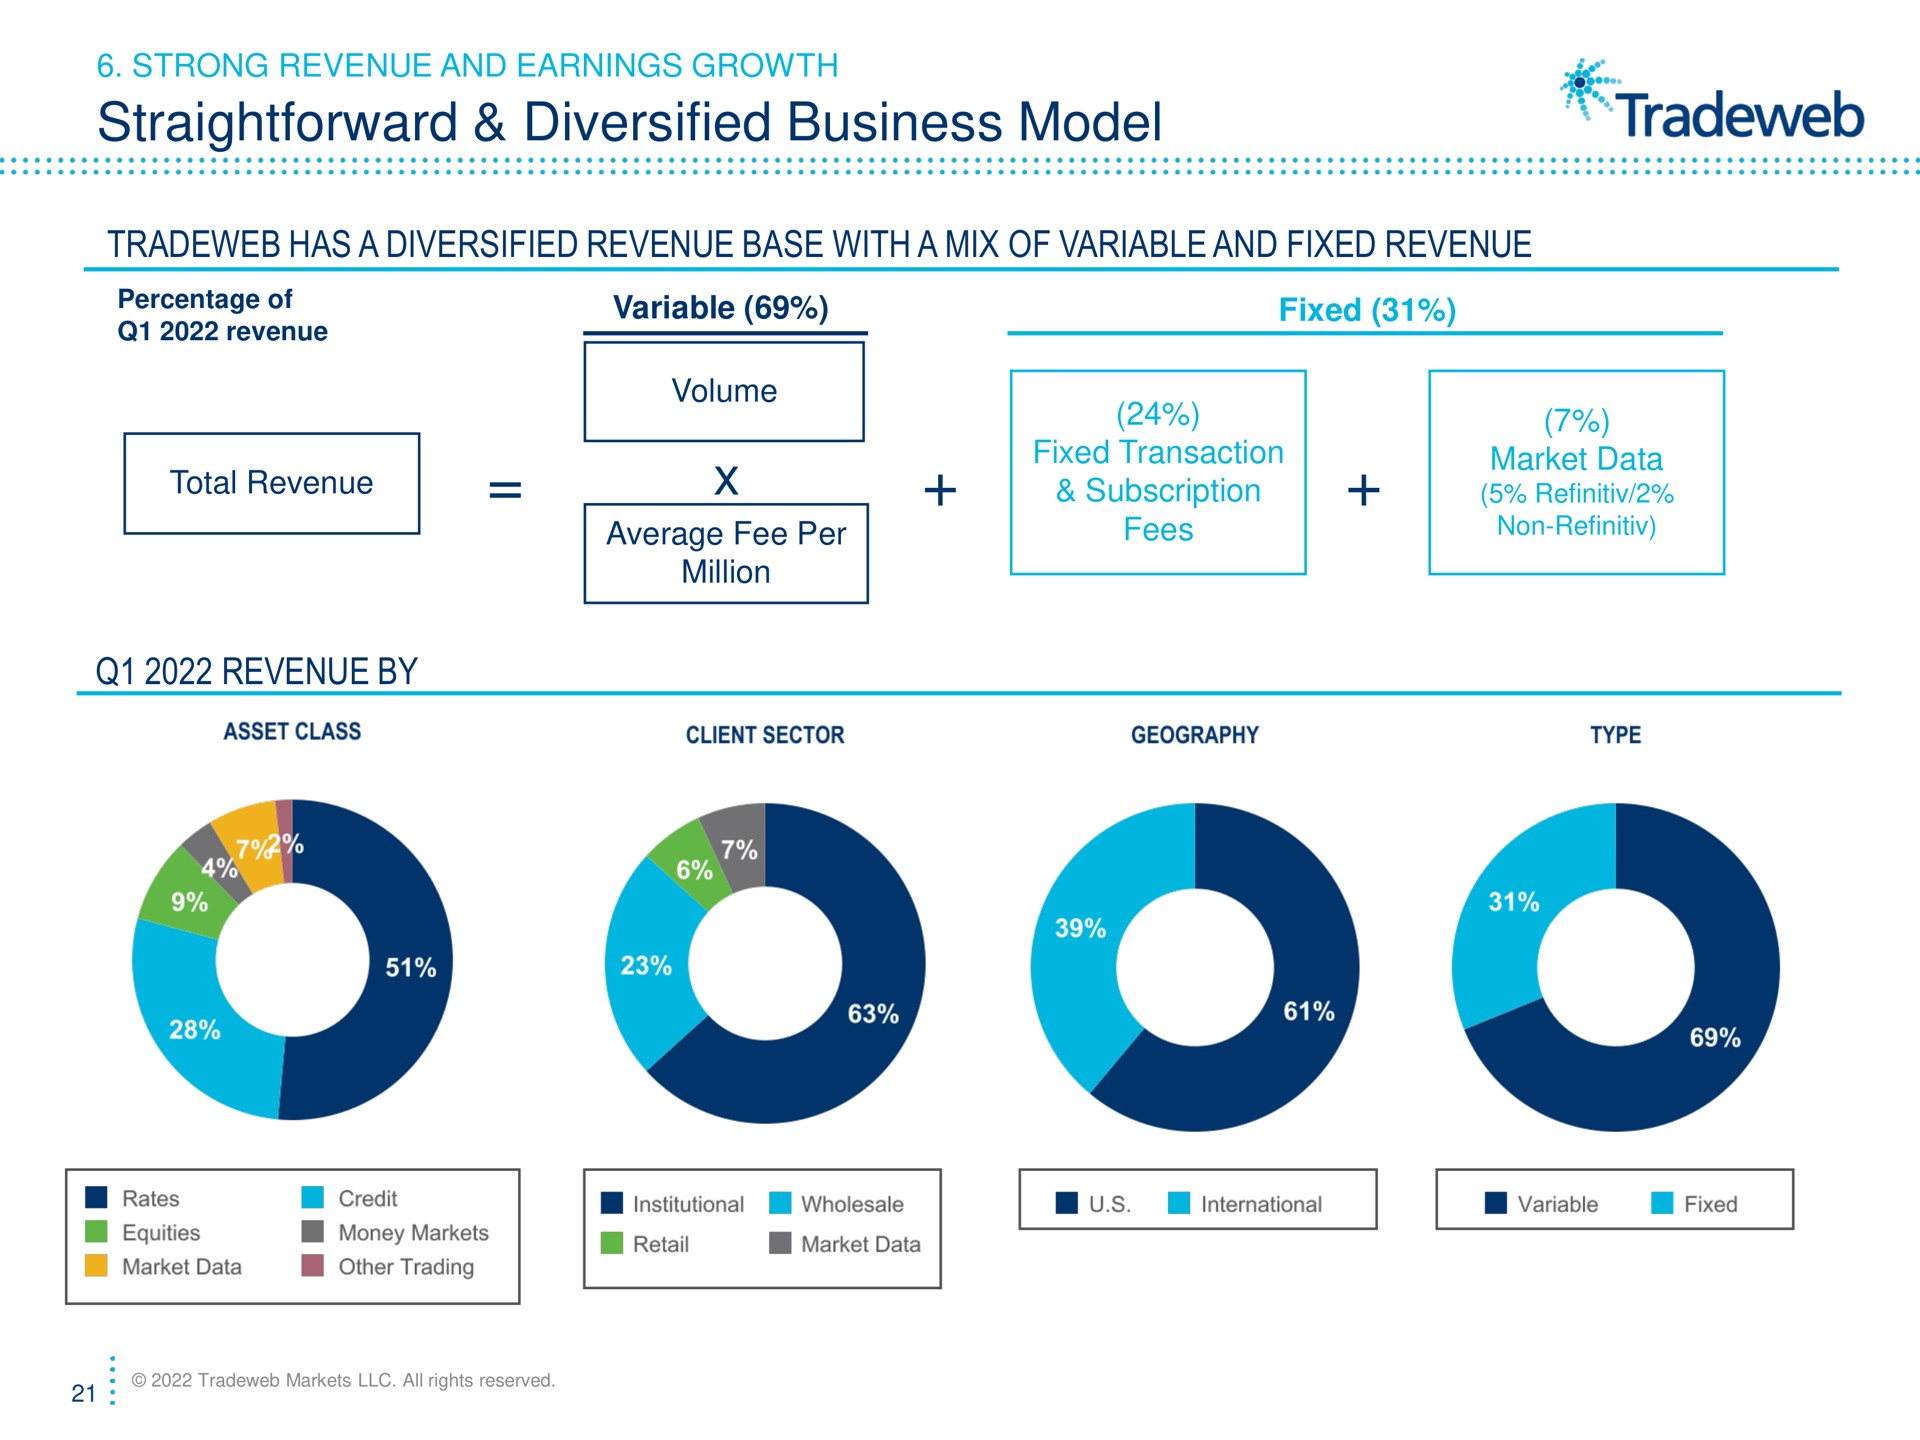 straightforward diversified business model has a diversified revenue base with a mix of variable and fixed revenue revenue by strong earnings growth percentage volume total average fee per million transaction subscription market data | Tradeweb